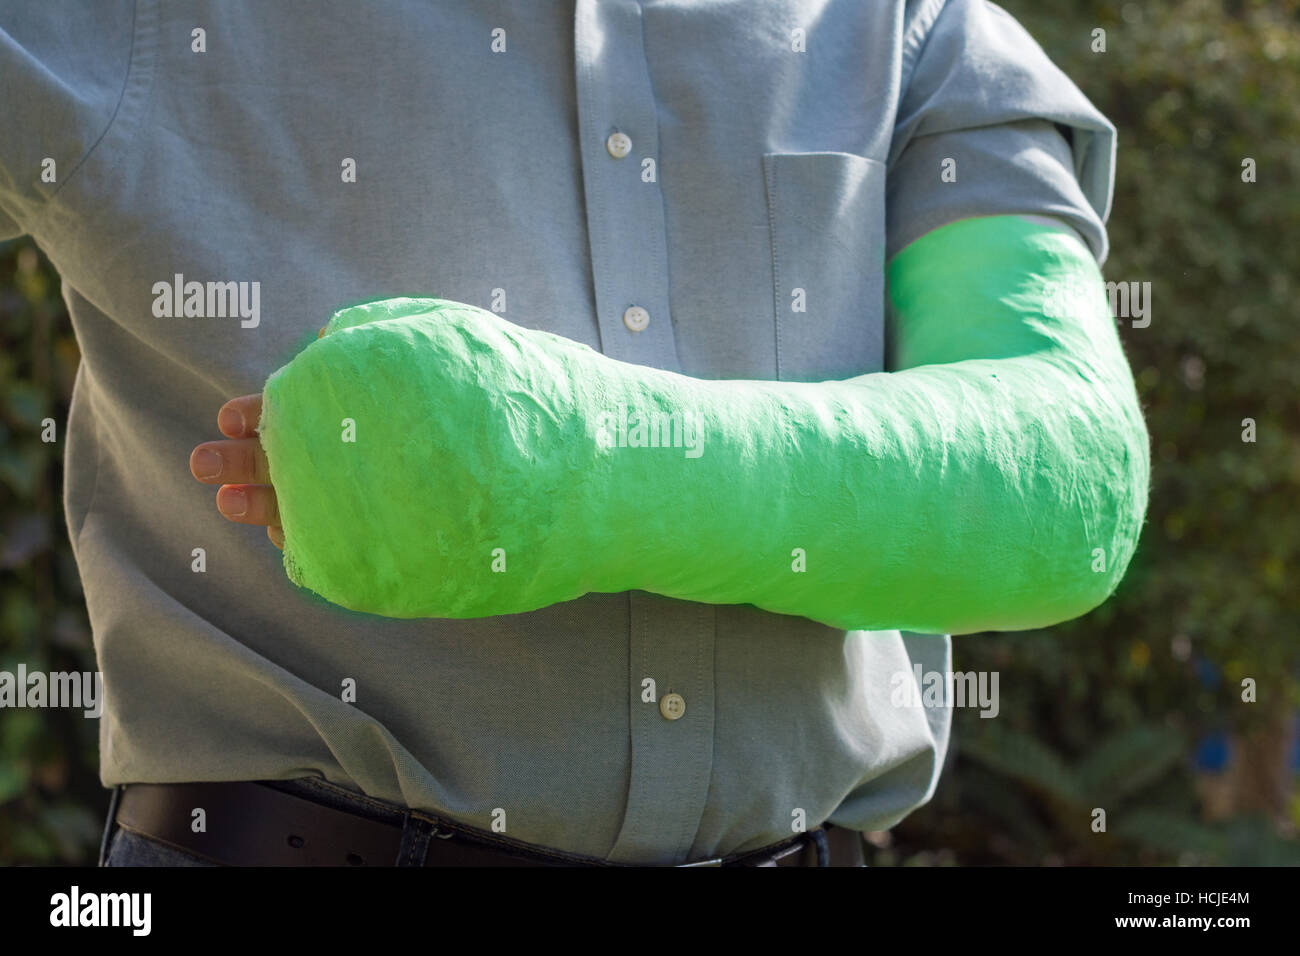 An arm and elbow in a green plaster / fiberglass cast worn by a young man standing in a garden Stock Photo